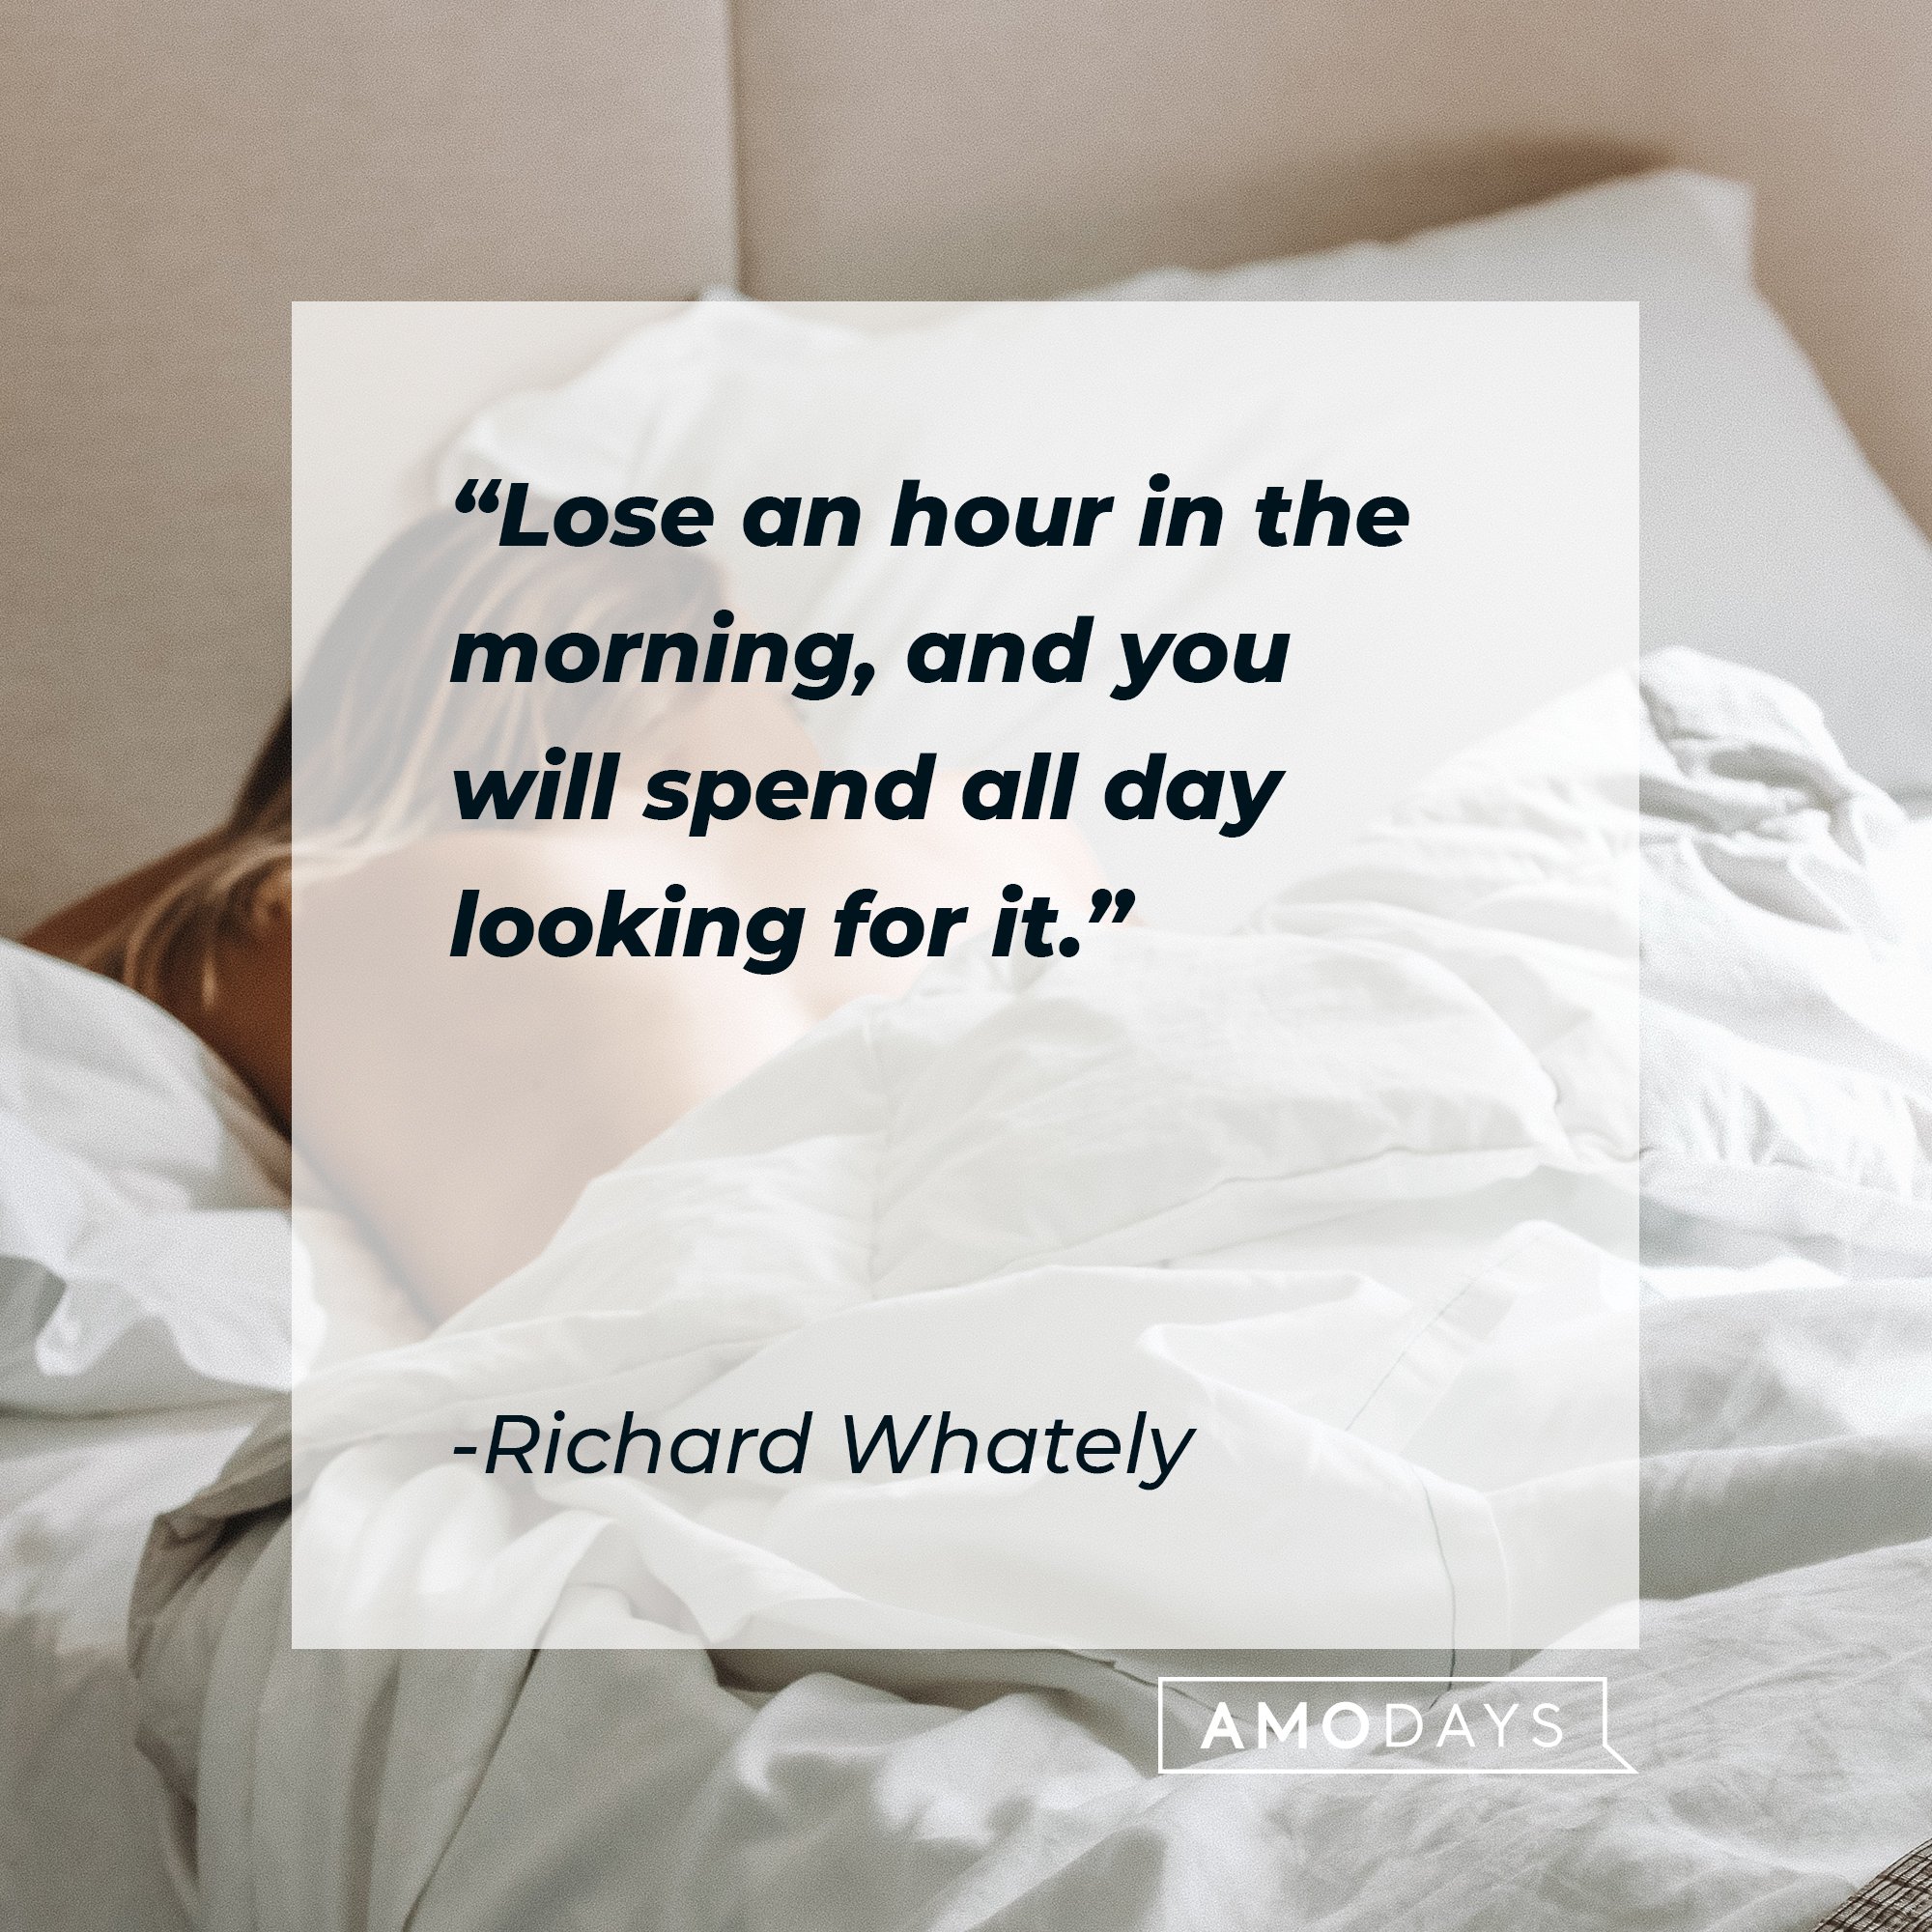 Richard Whately’s quote: "Lose an hour in the morning, and you will spend all day looking for it." | Image: AmoDays 